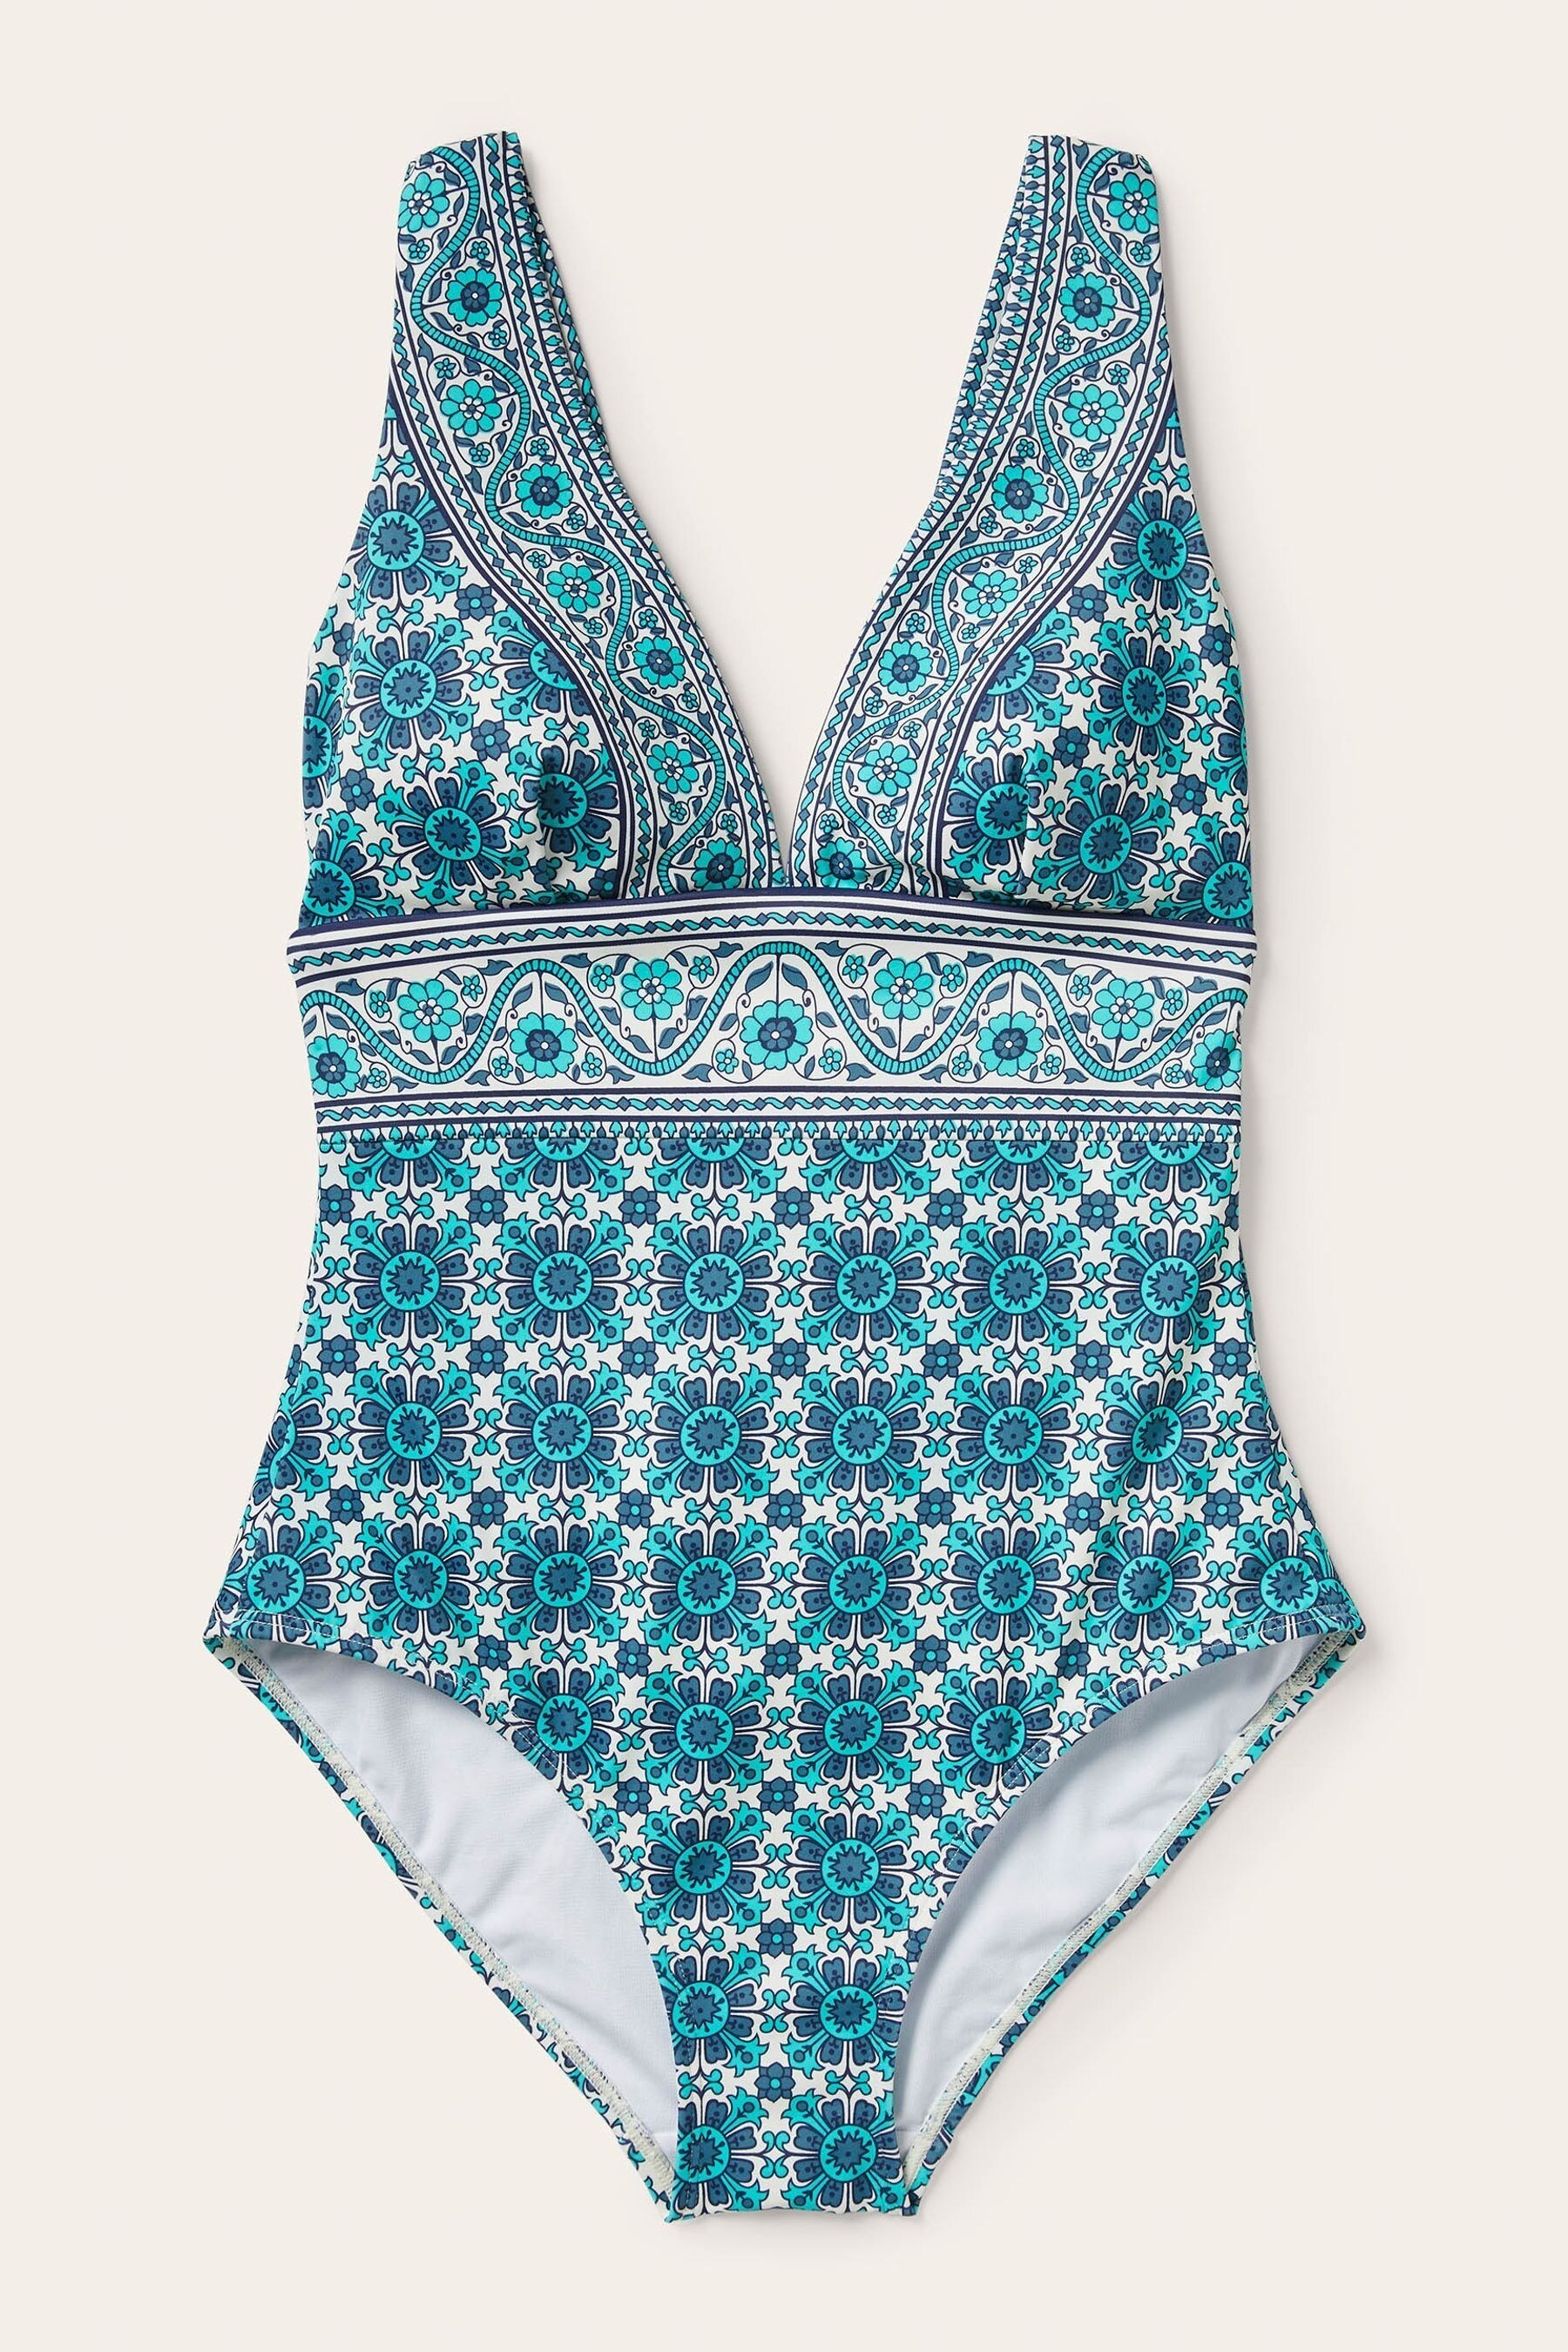 Buy Boden Blue Calabria Swimsuit from the Next UK online shop